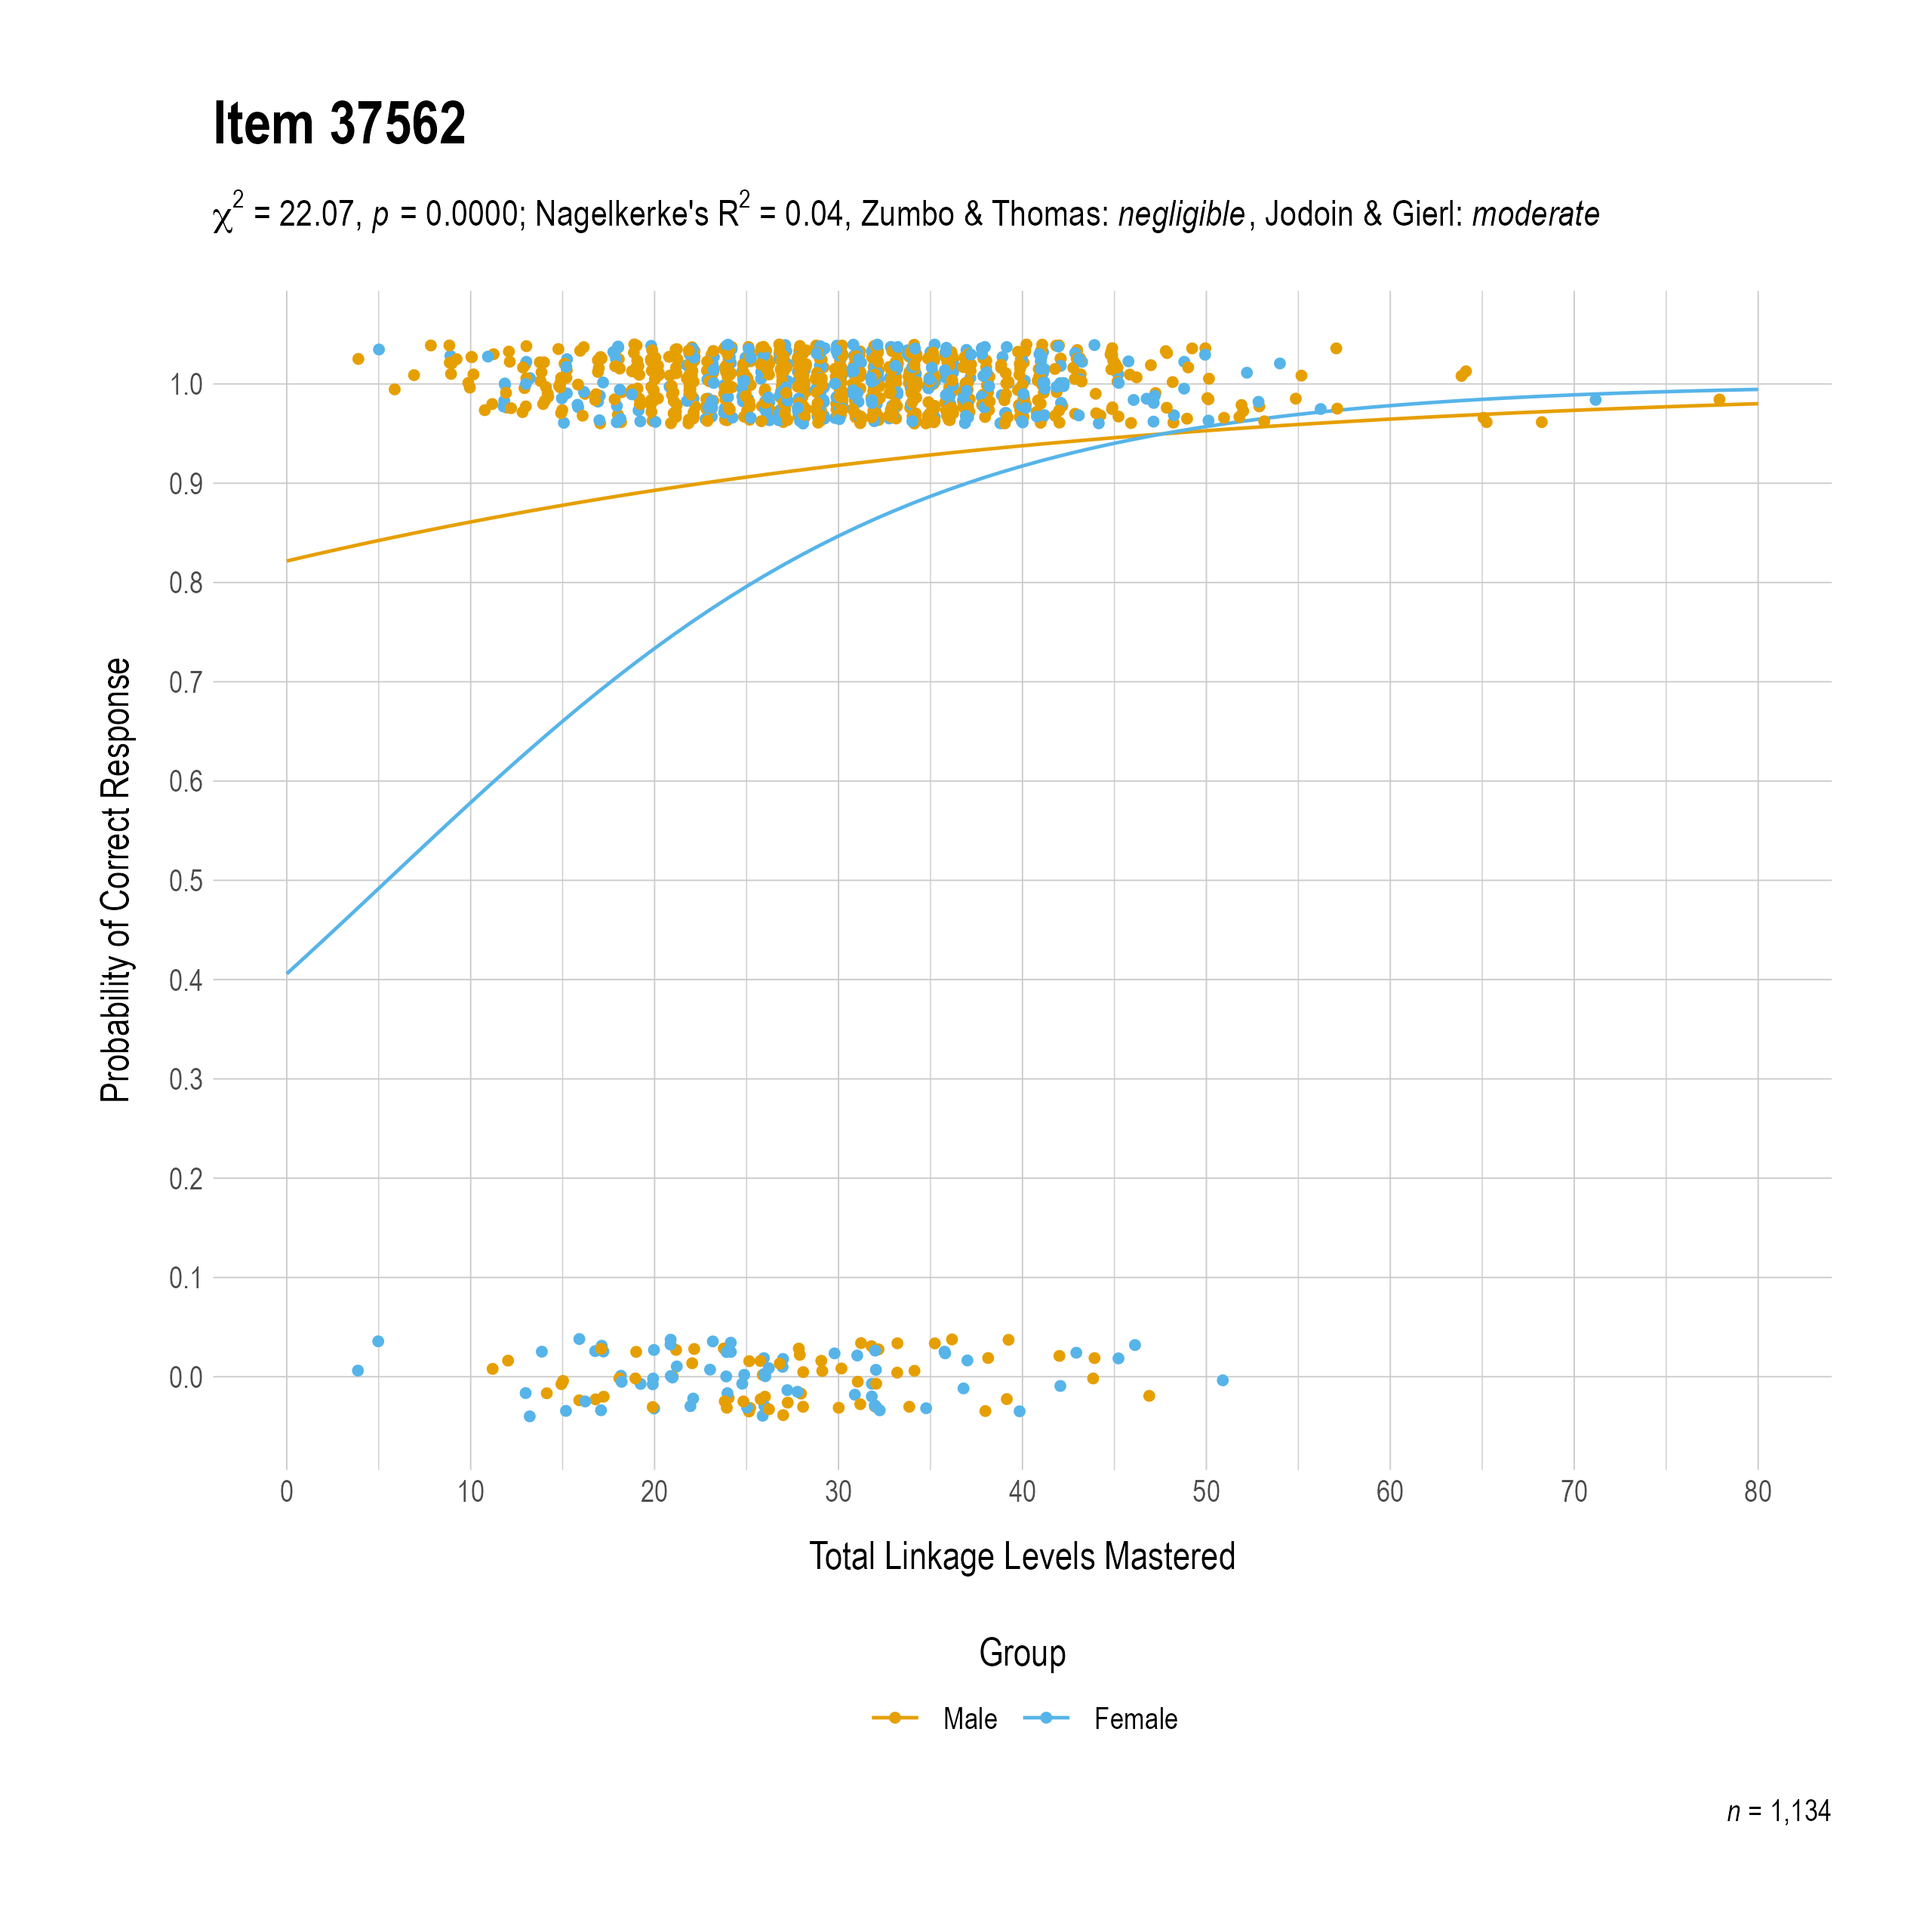 The plot of the combined gender differential item function evidence for English language arts item 37562. The figure contains points shaded by group. The figure also contains a logistic regression curve for each group. The total linkage levels mastered in is on the x-axis, and the probability of a correct response is on the y-axis.